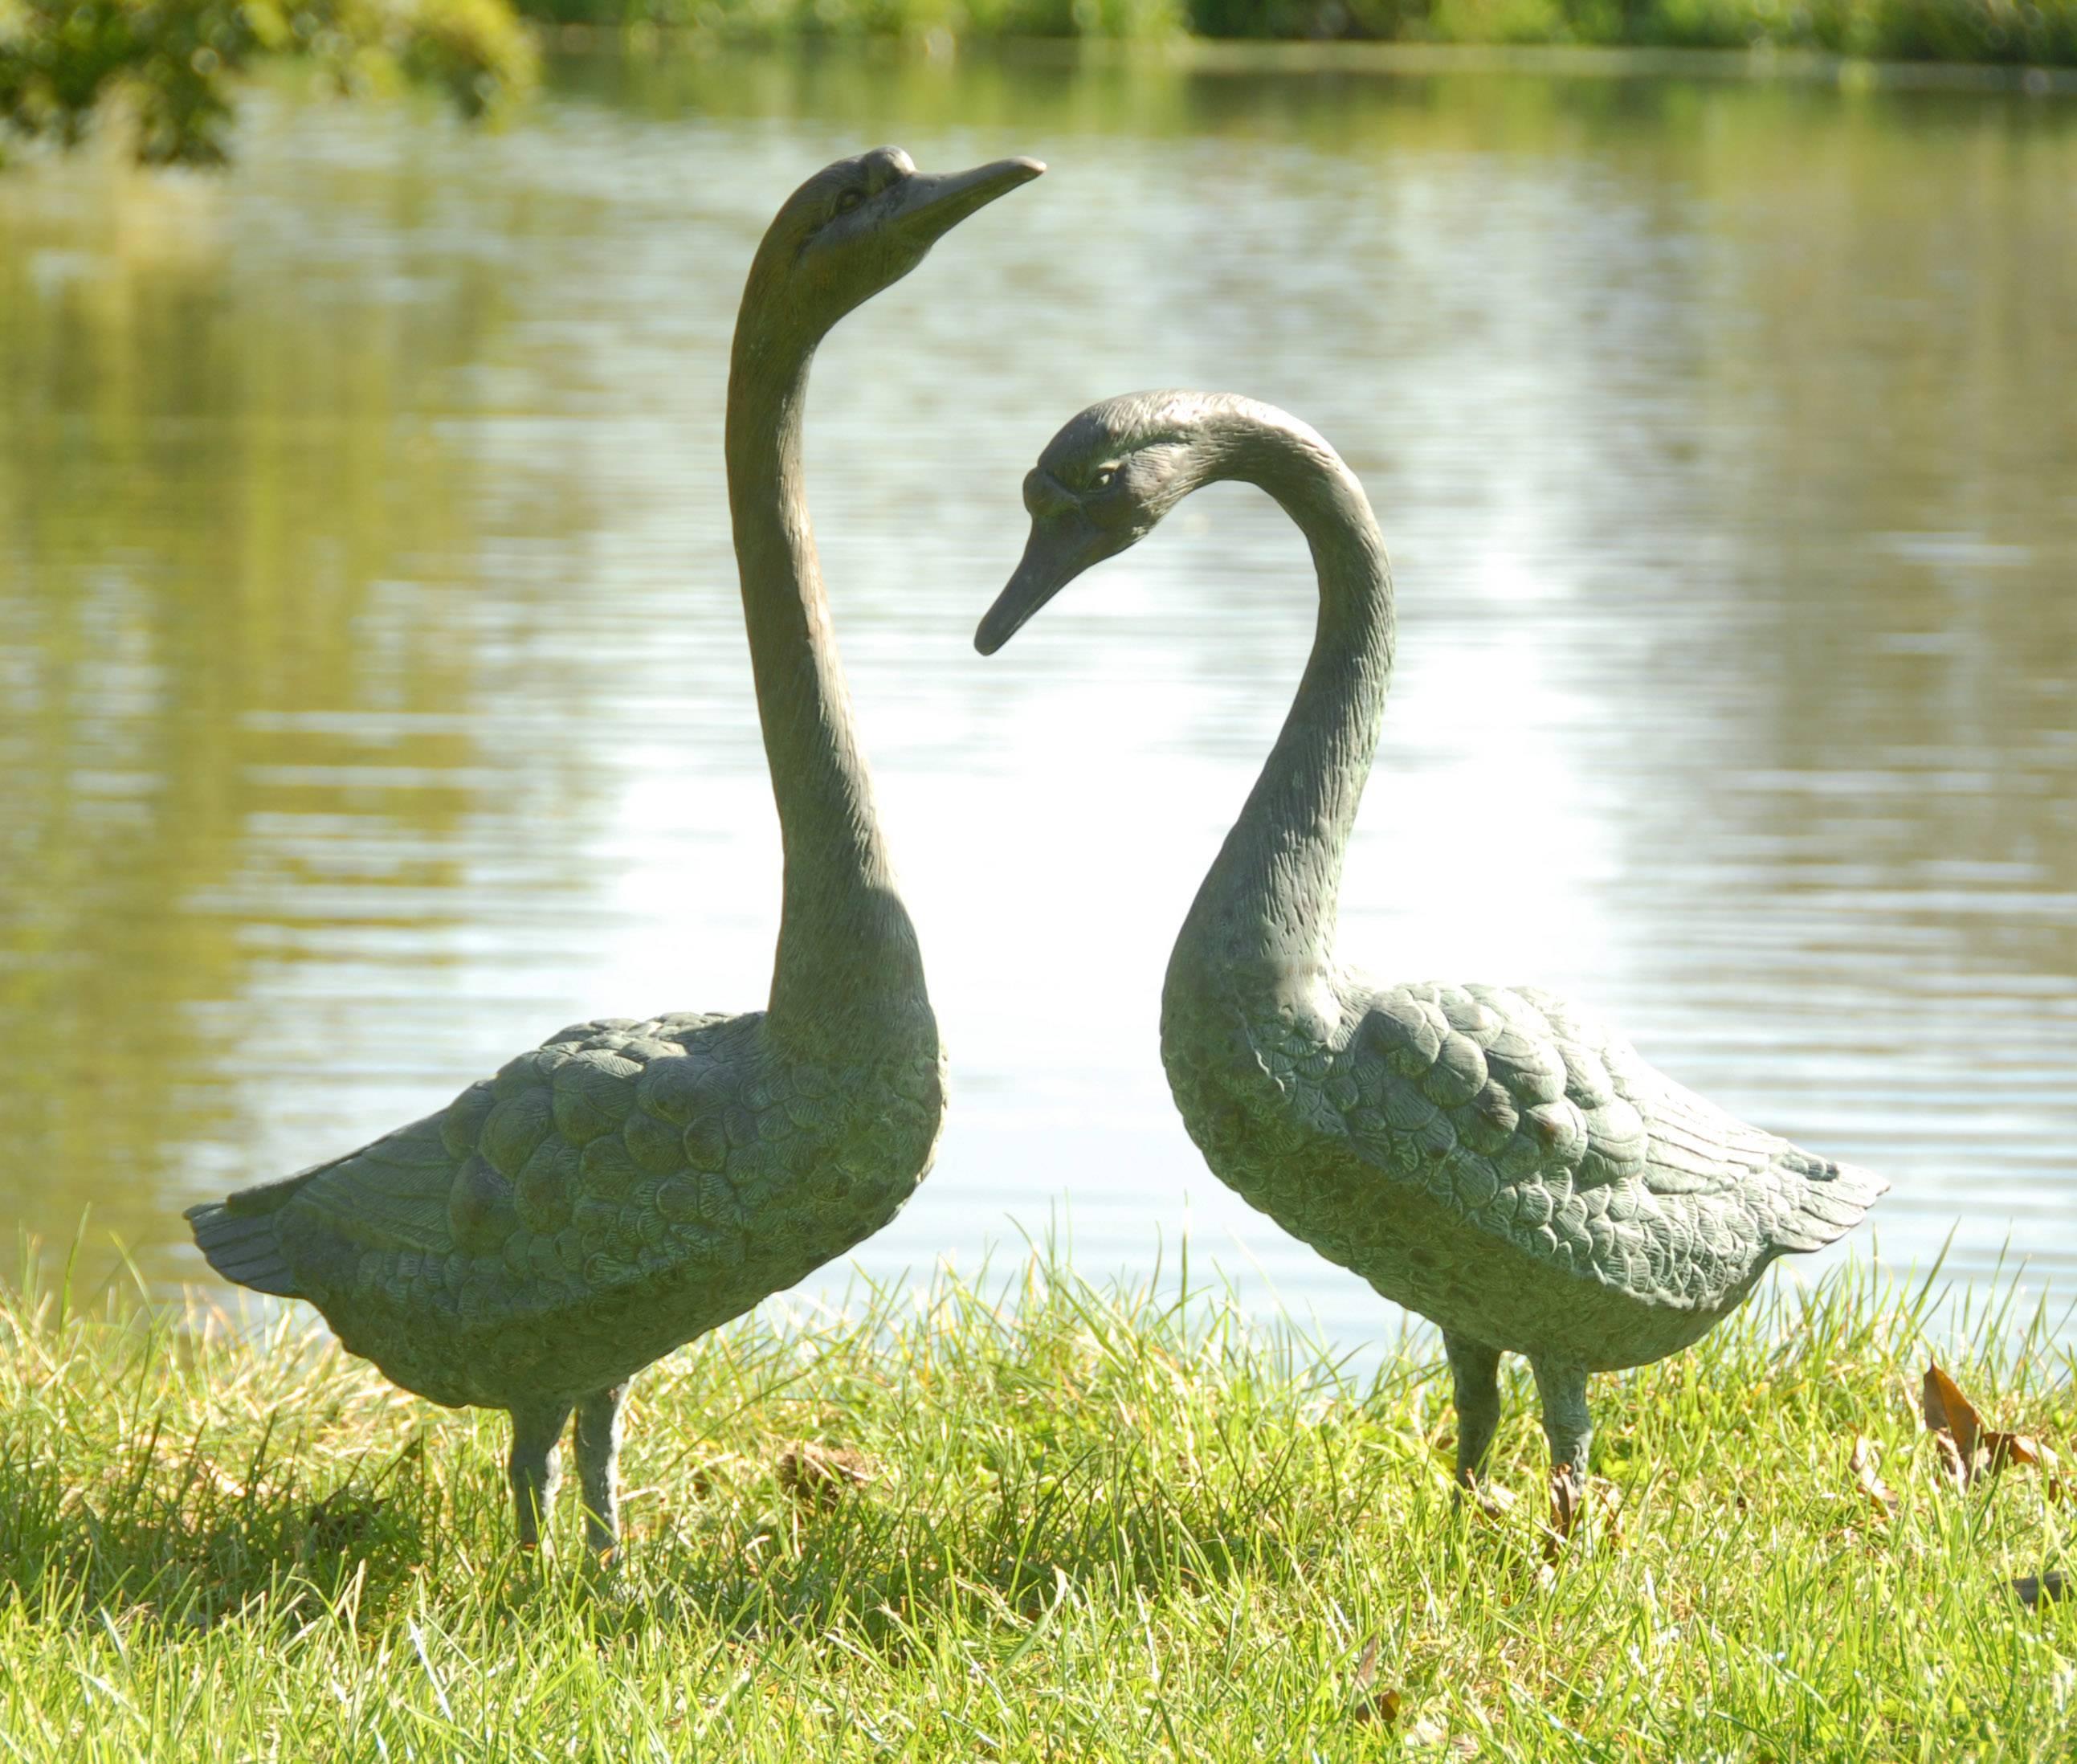 Adorable pair of lifesize patinated bronze statues of geese, 20th century freestanding for outdoor or indoor use.
Measure: The tallest is 27 inches high, the other is 22.5 inches high.

Price includes free shipping.
   